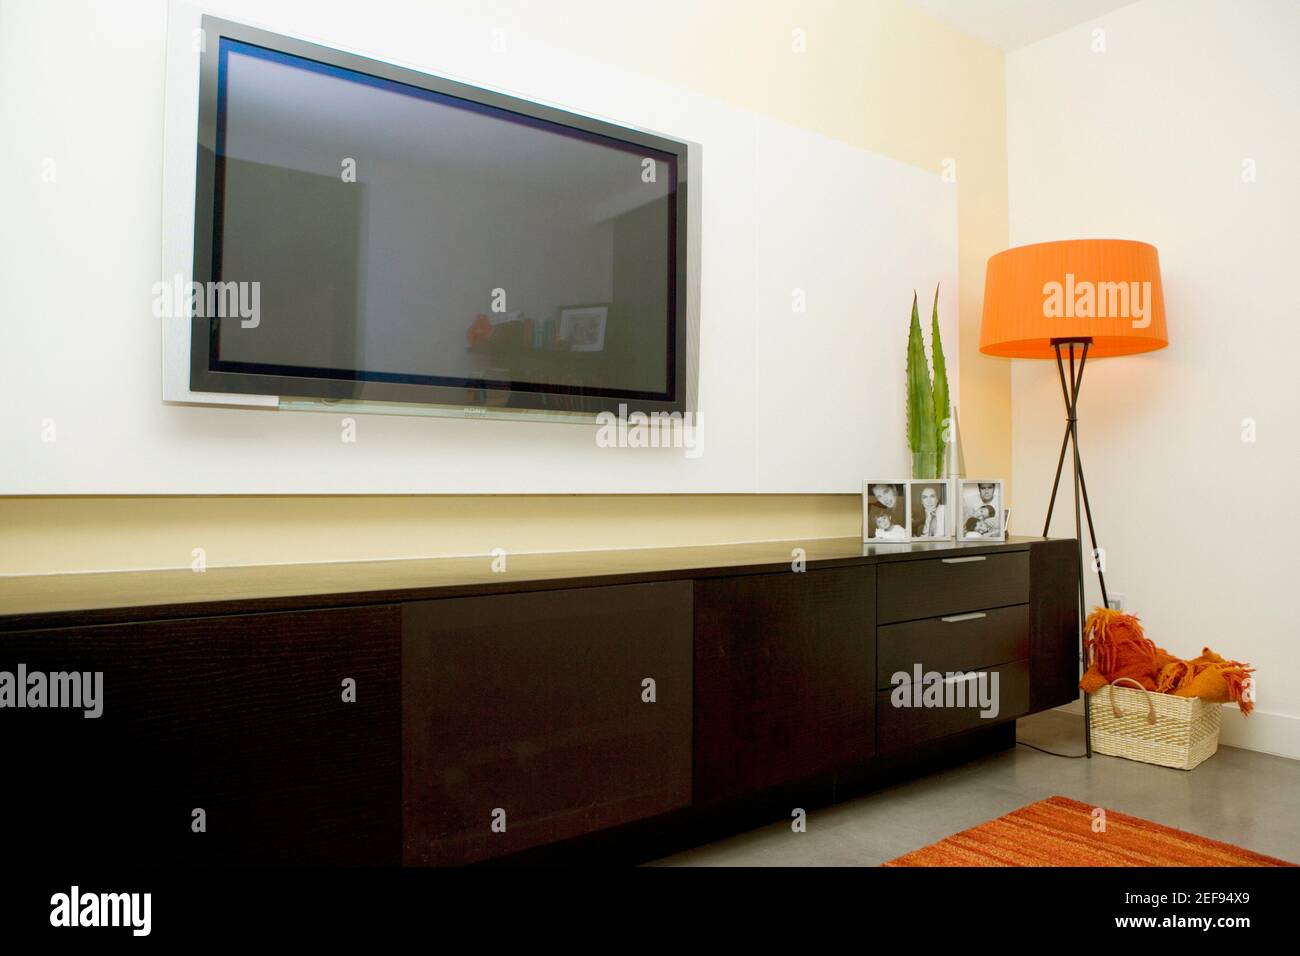 Flat panel television in a living room Stock Photo